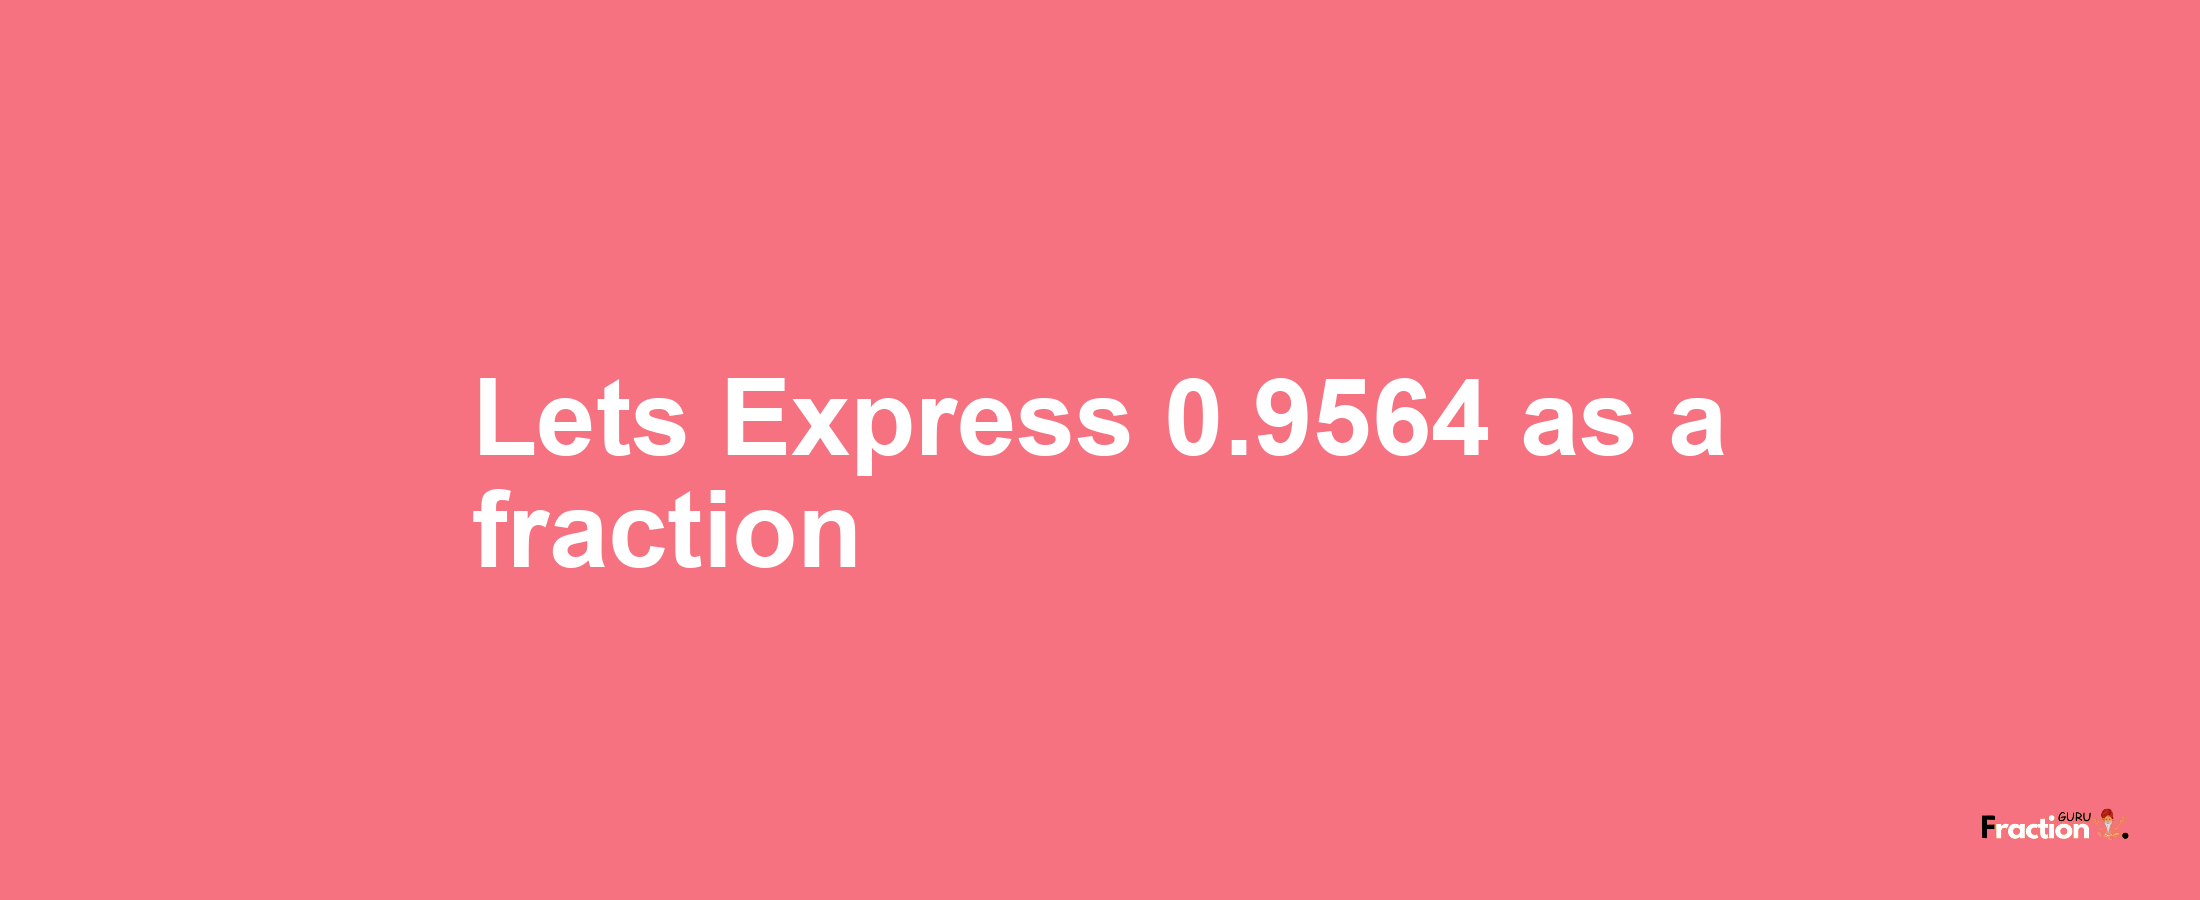 Lets Express 0.9564 as afraction